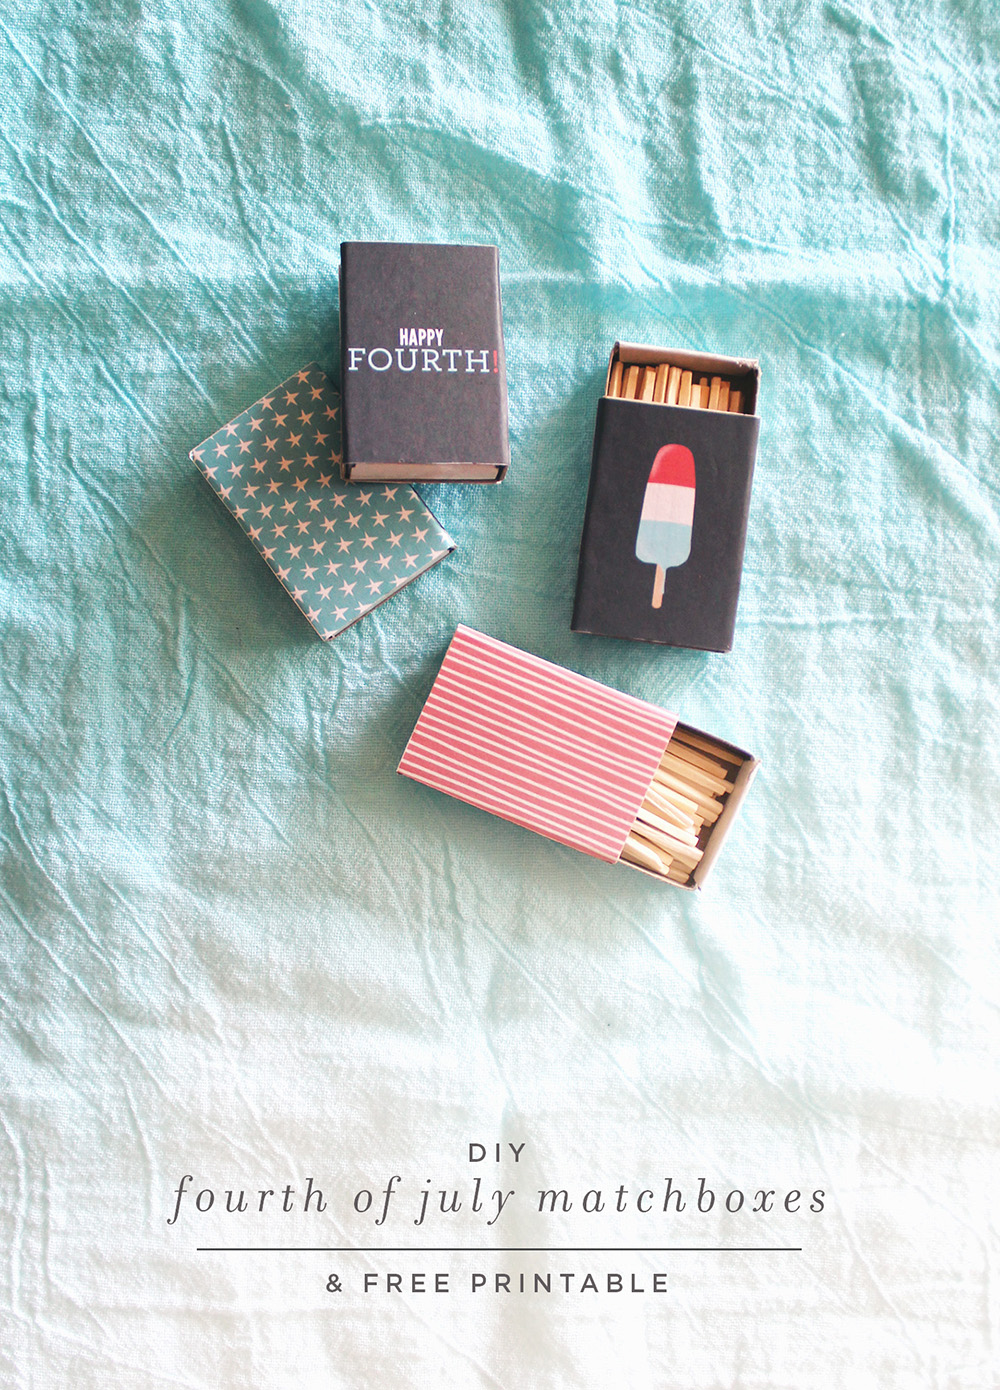 diy-4th-of-july-matchboxes